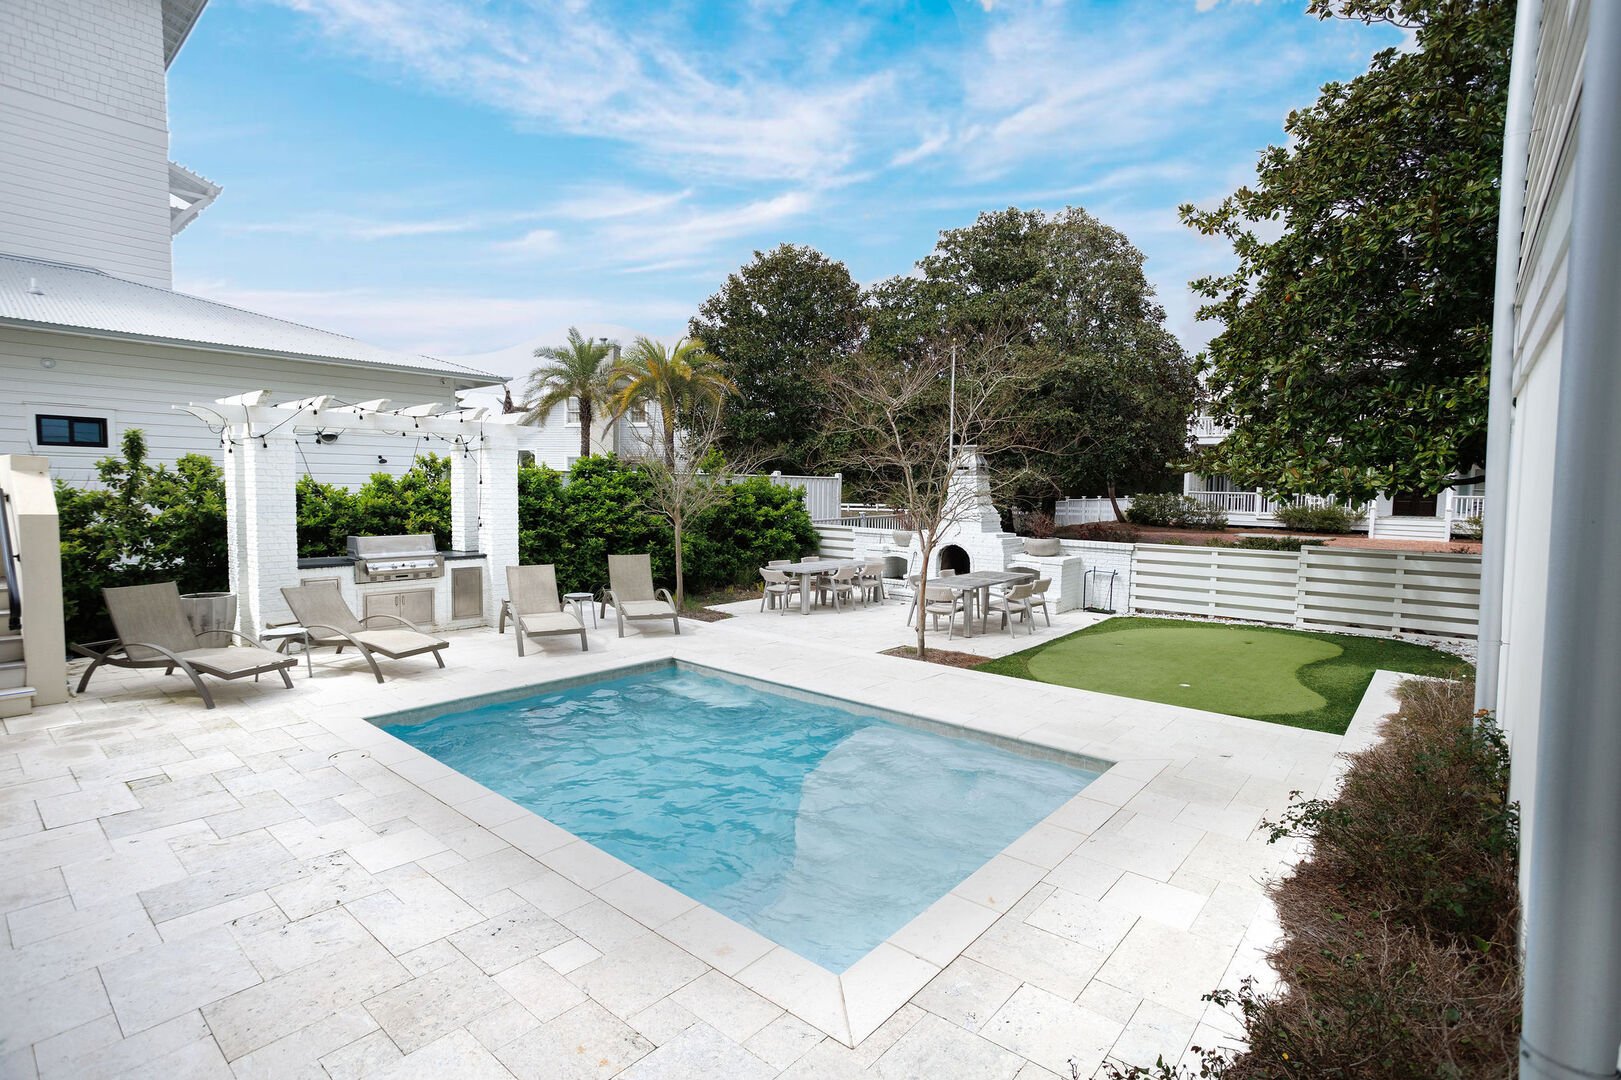 Backyard is perfect for entertaining with a heated pool!